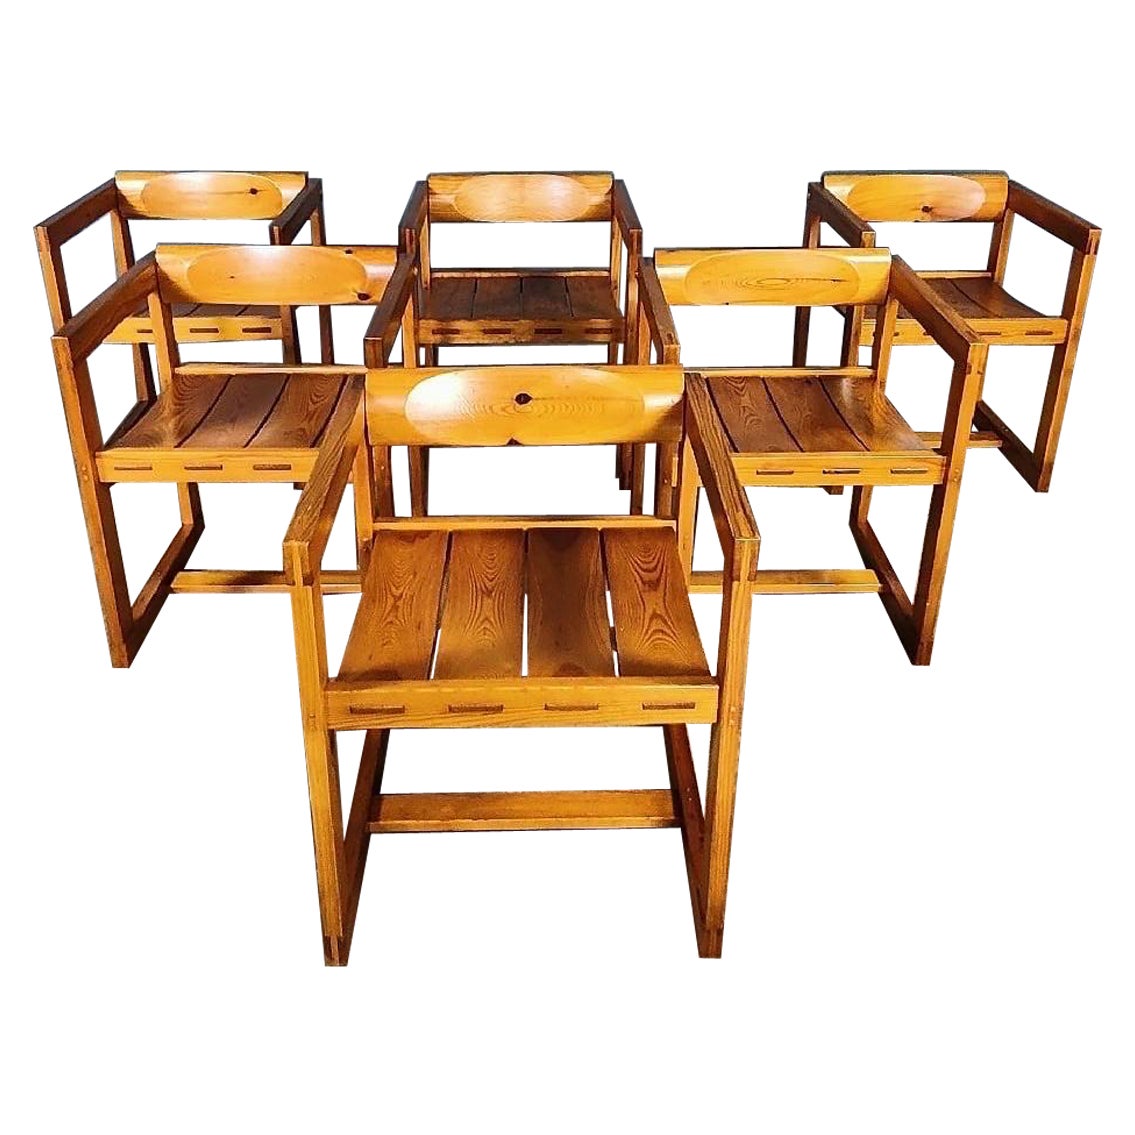 Edvin Helseth Dining Room Chairs